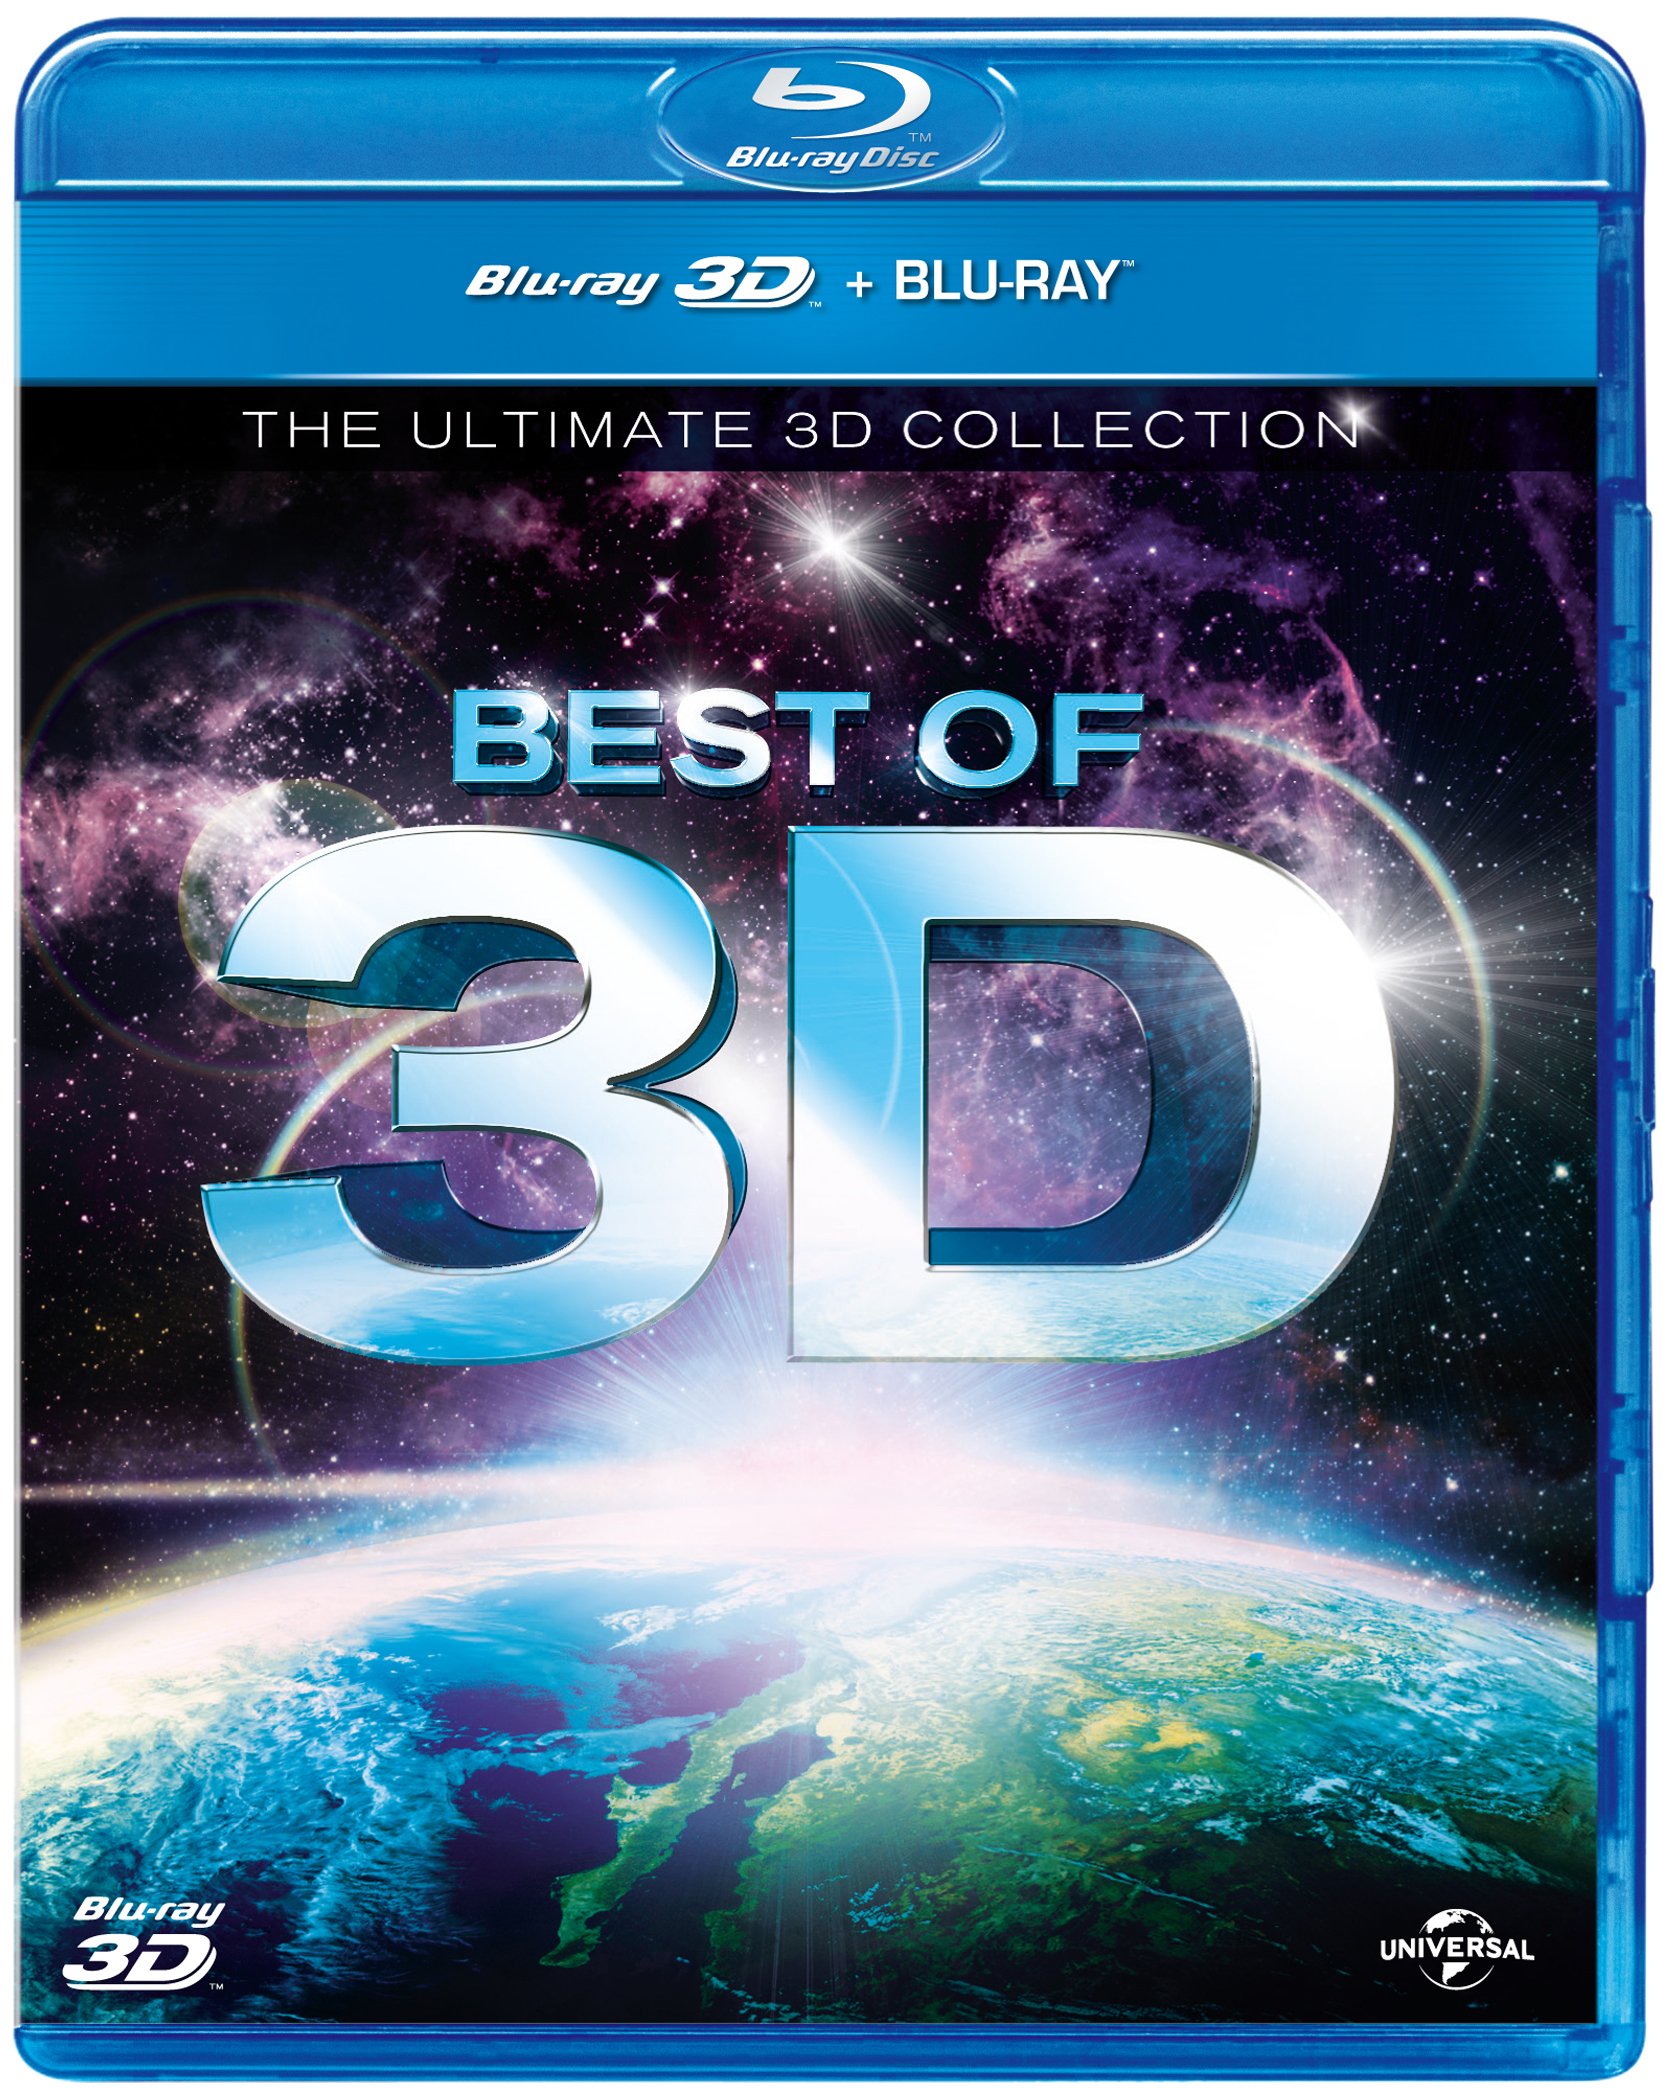 Book Cover Best of 3D: The Ultimate 3D Collection [Blu-ray 3D + Blu-ray] [2013] [Region Free]